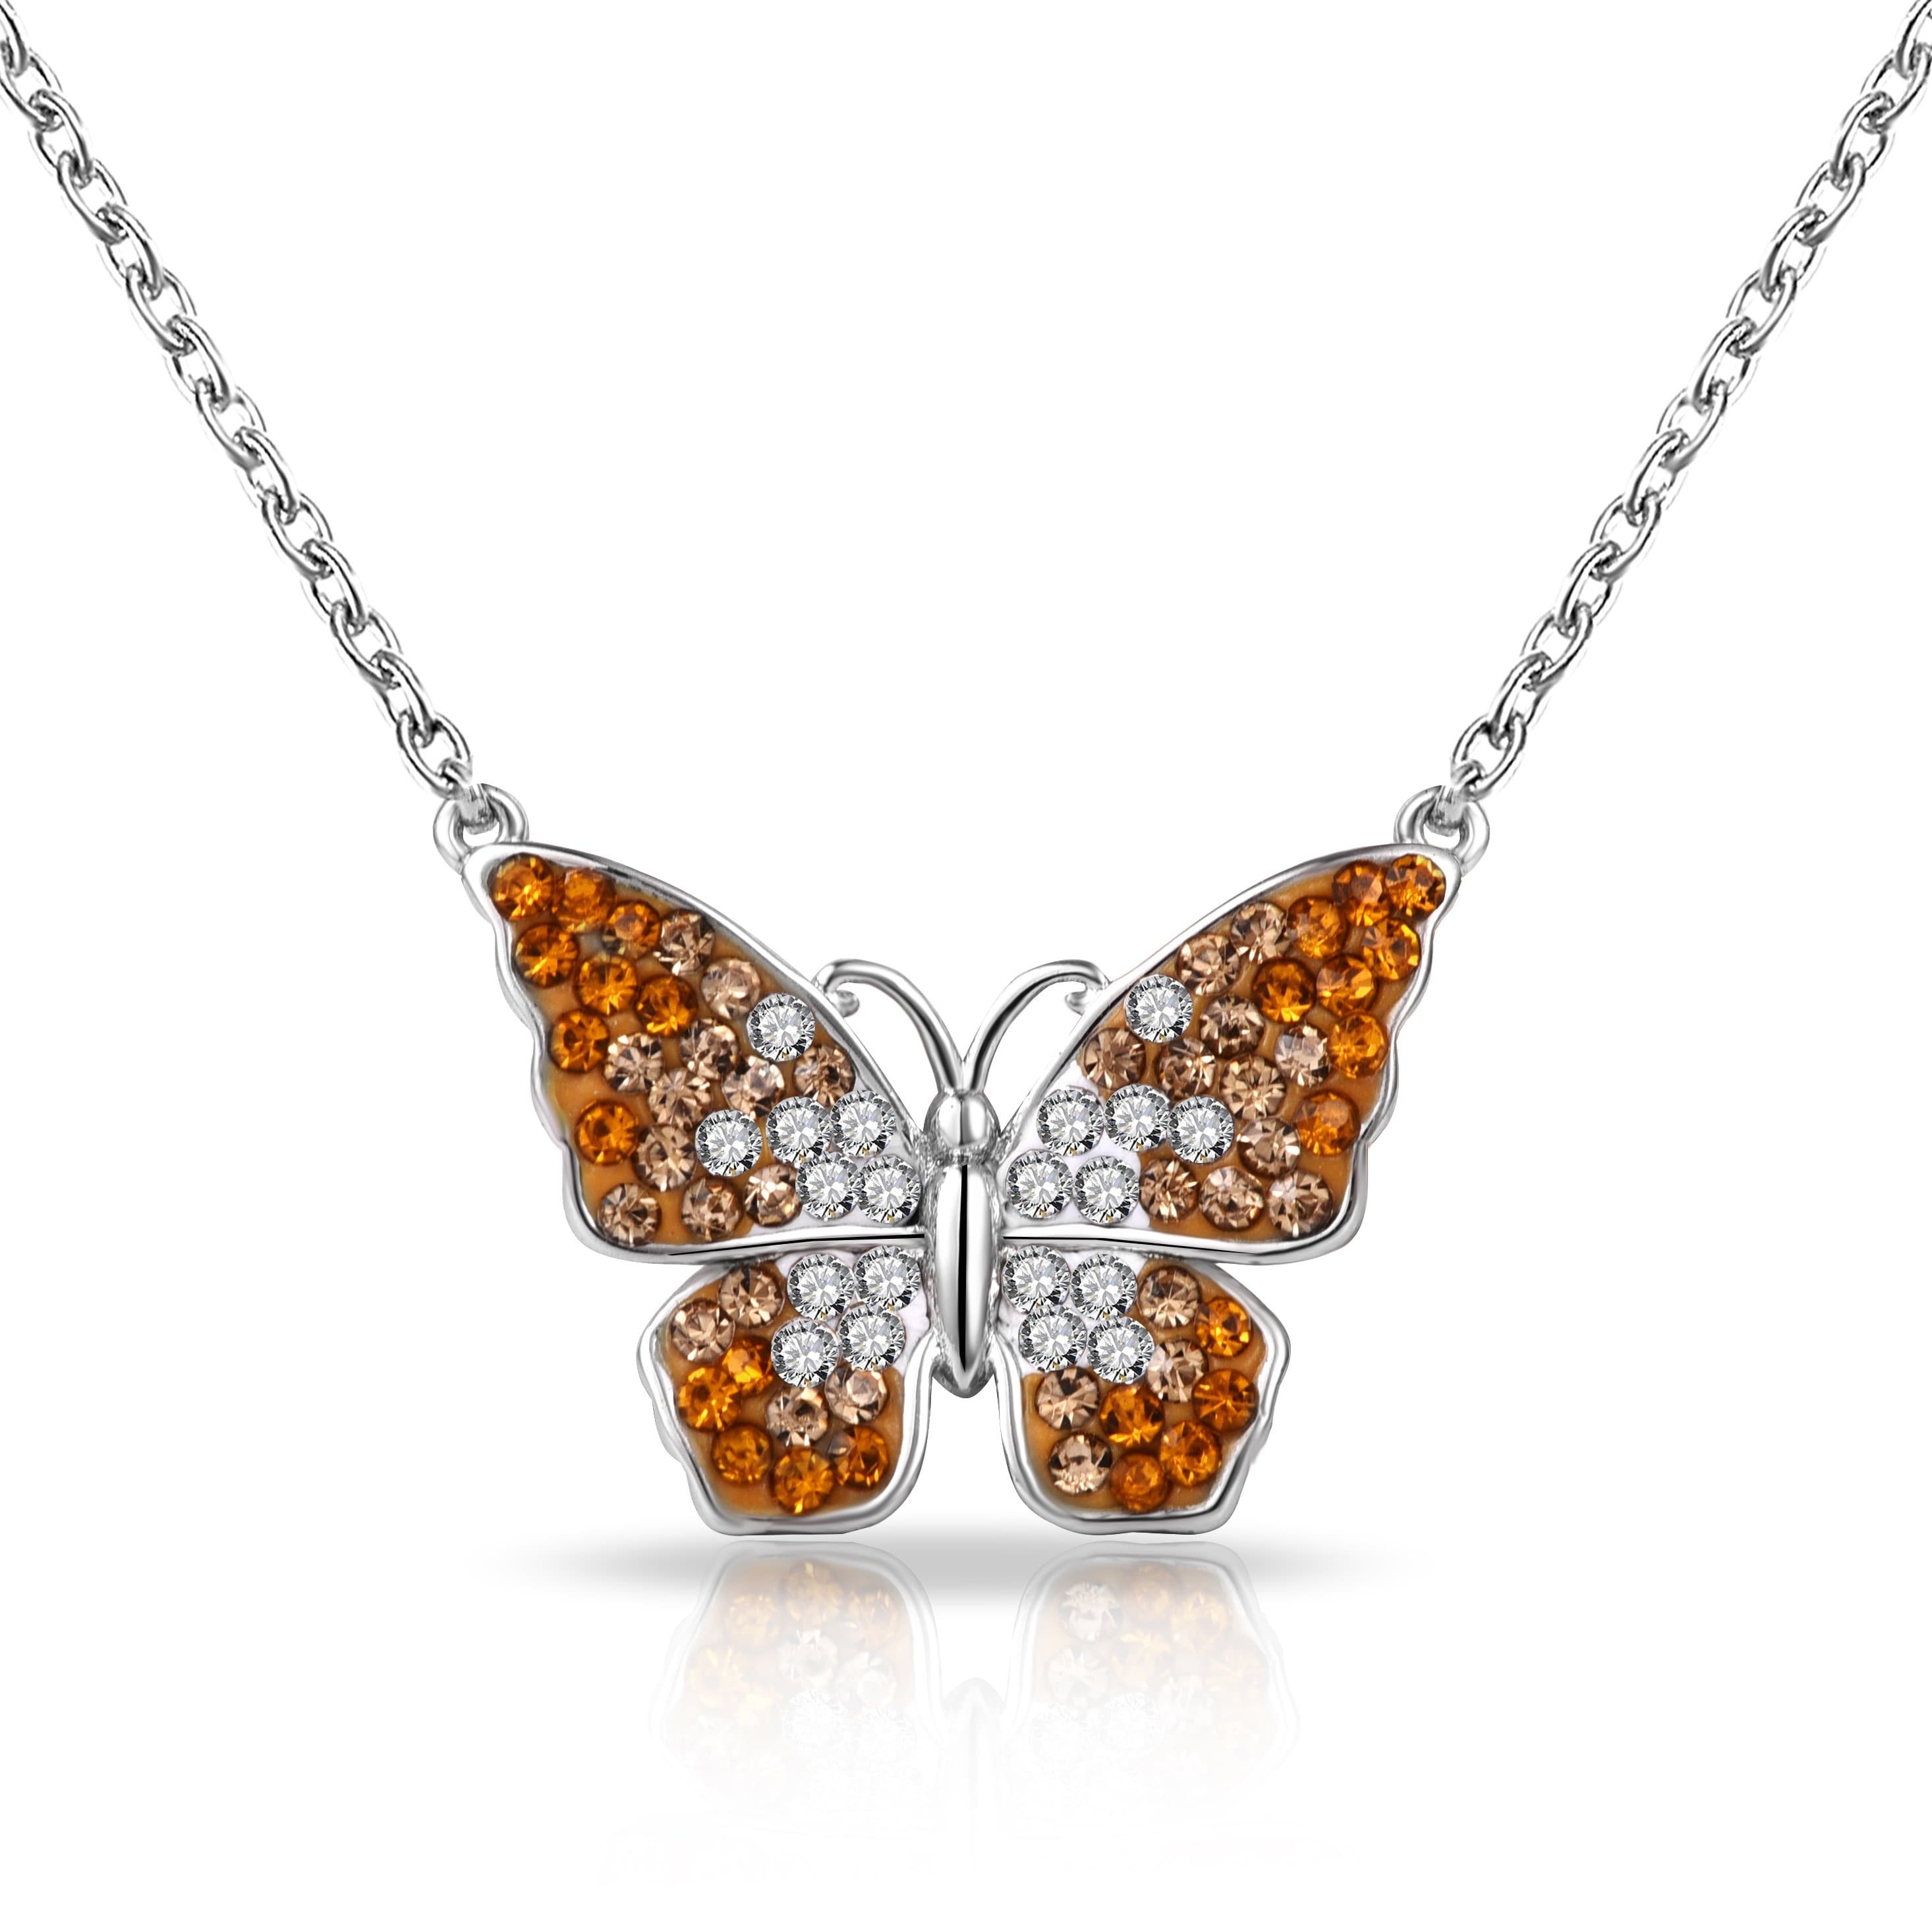 Butterfly Necklace with Zircondia® Crystals by Philip Jones Jewellery